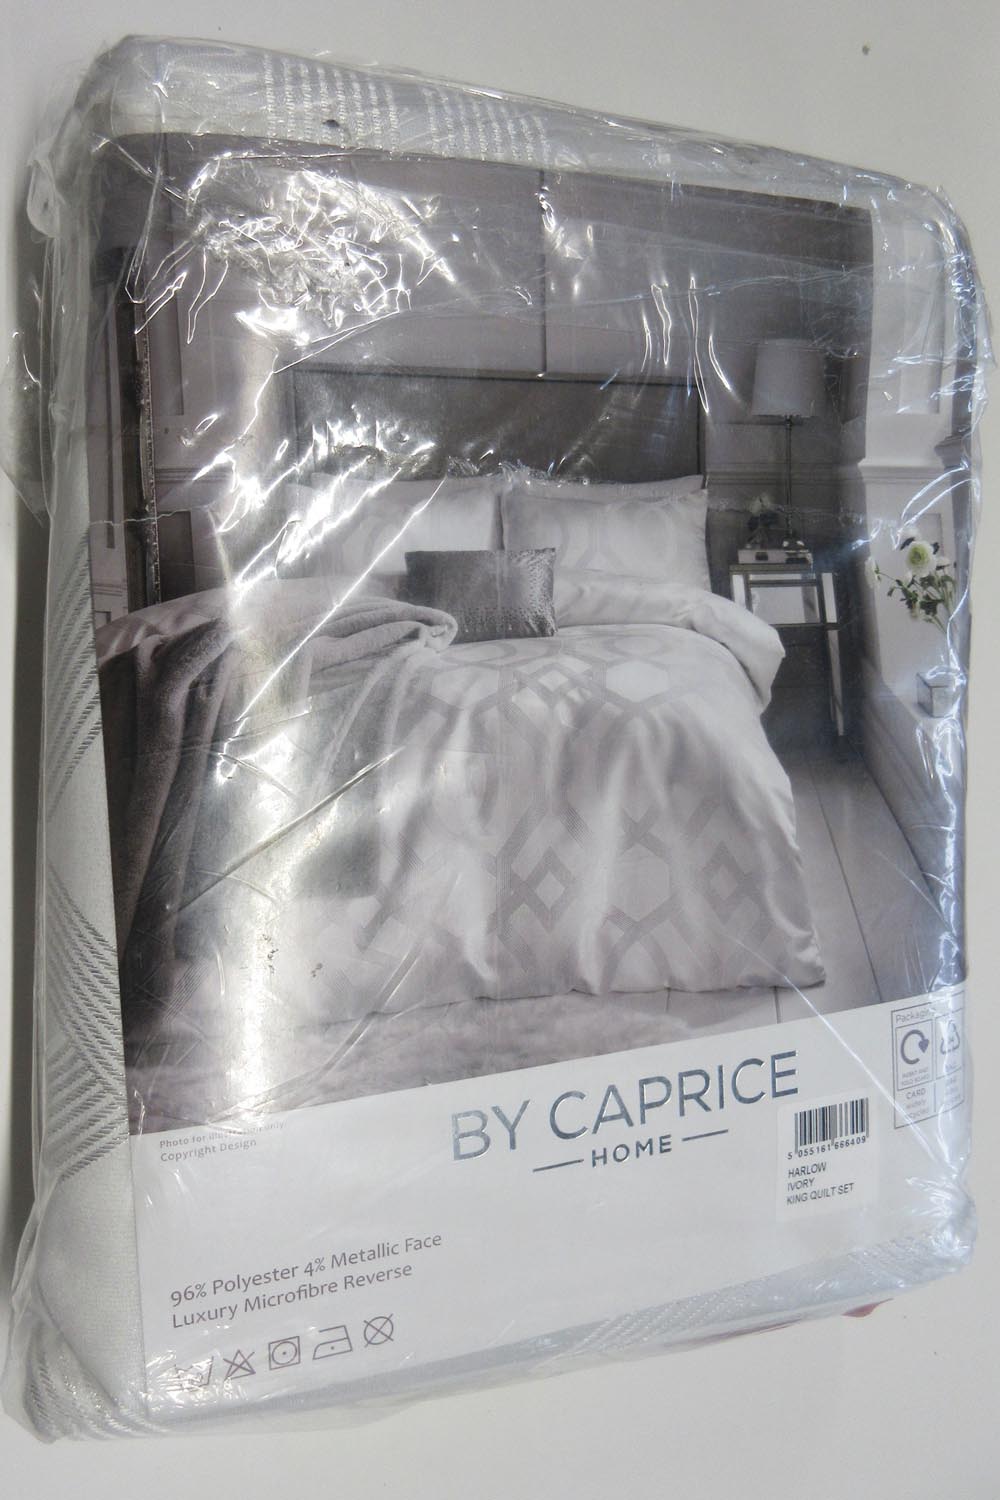 By Caprice Harlow Duvet Cover Set, Size: Kingsize, RRP £70